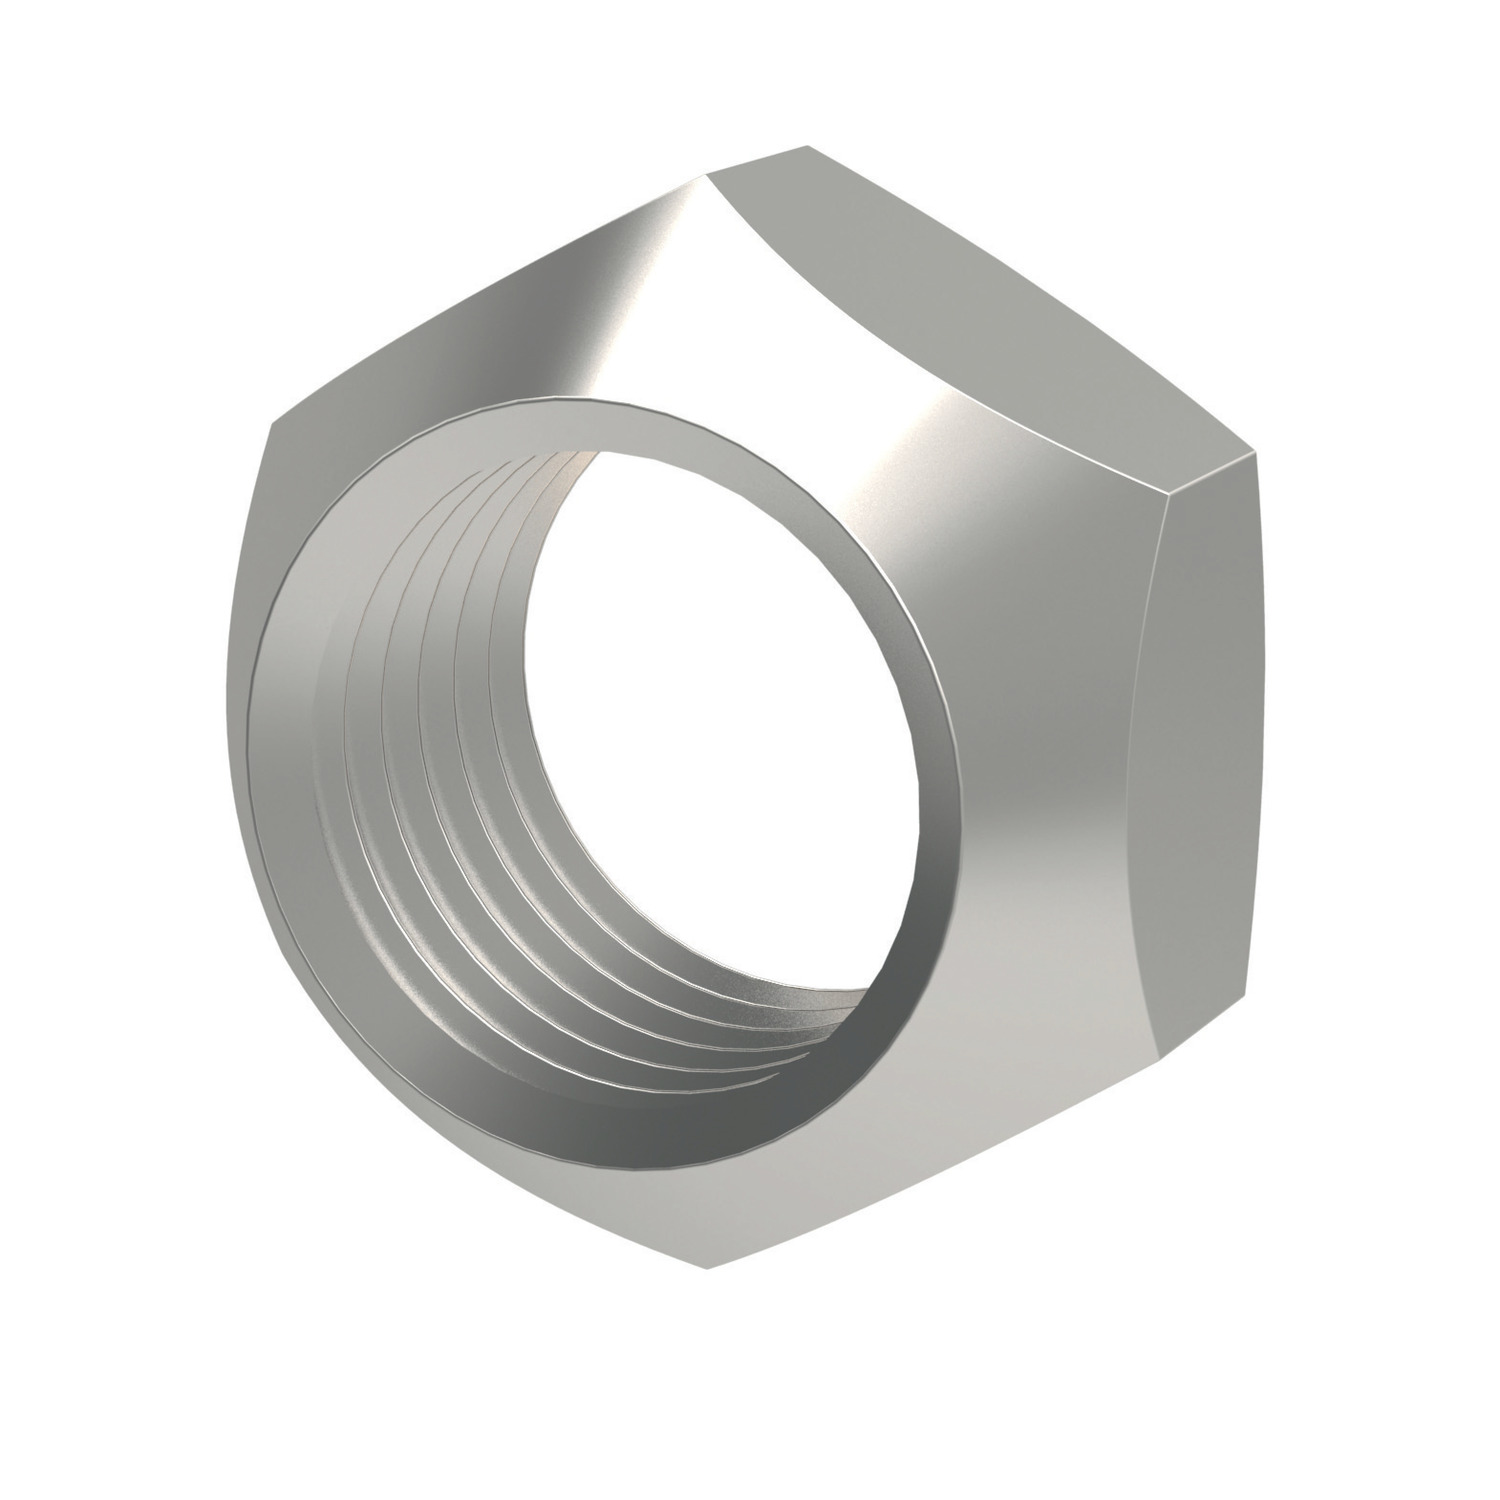 Stover Nuts Stainless steel A2. Reusable, resistant to shocks, vibrations and dynamic loads.